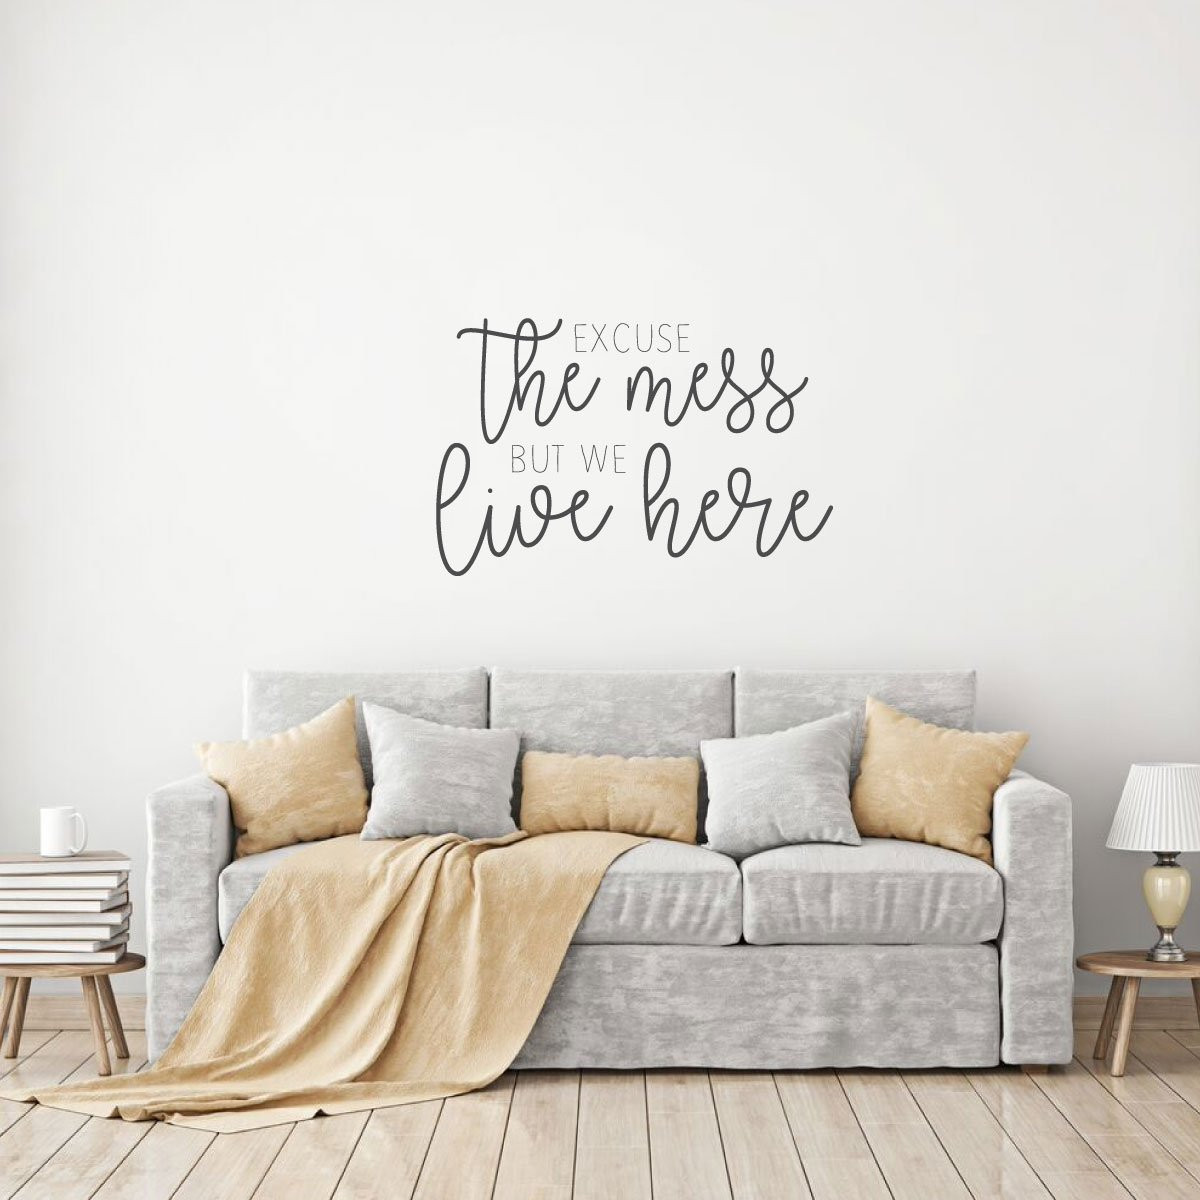 Wall Stickers For Living Room
 Excuse the Mess Quote for Living Room Vinyl Home Decor